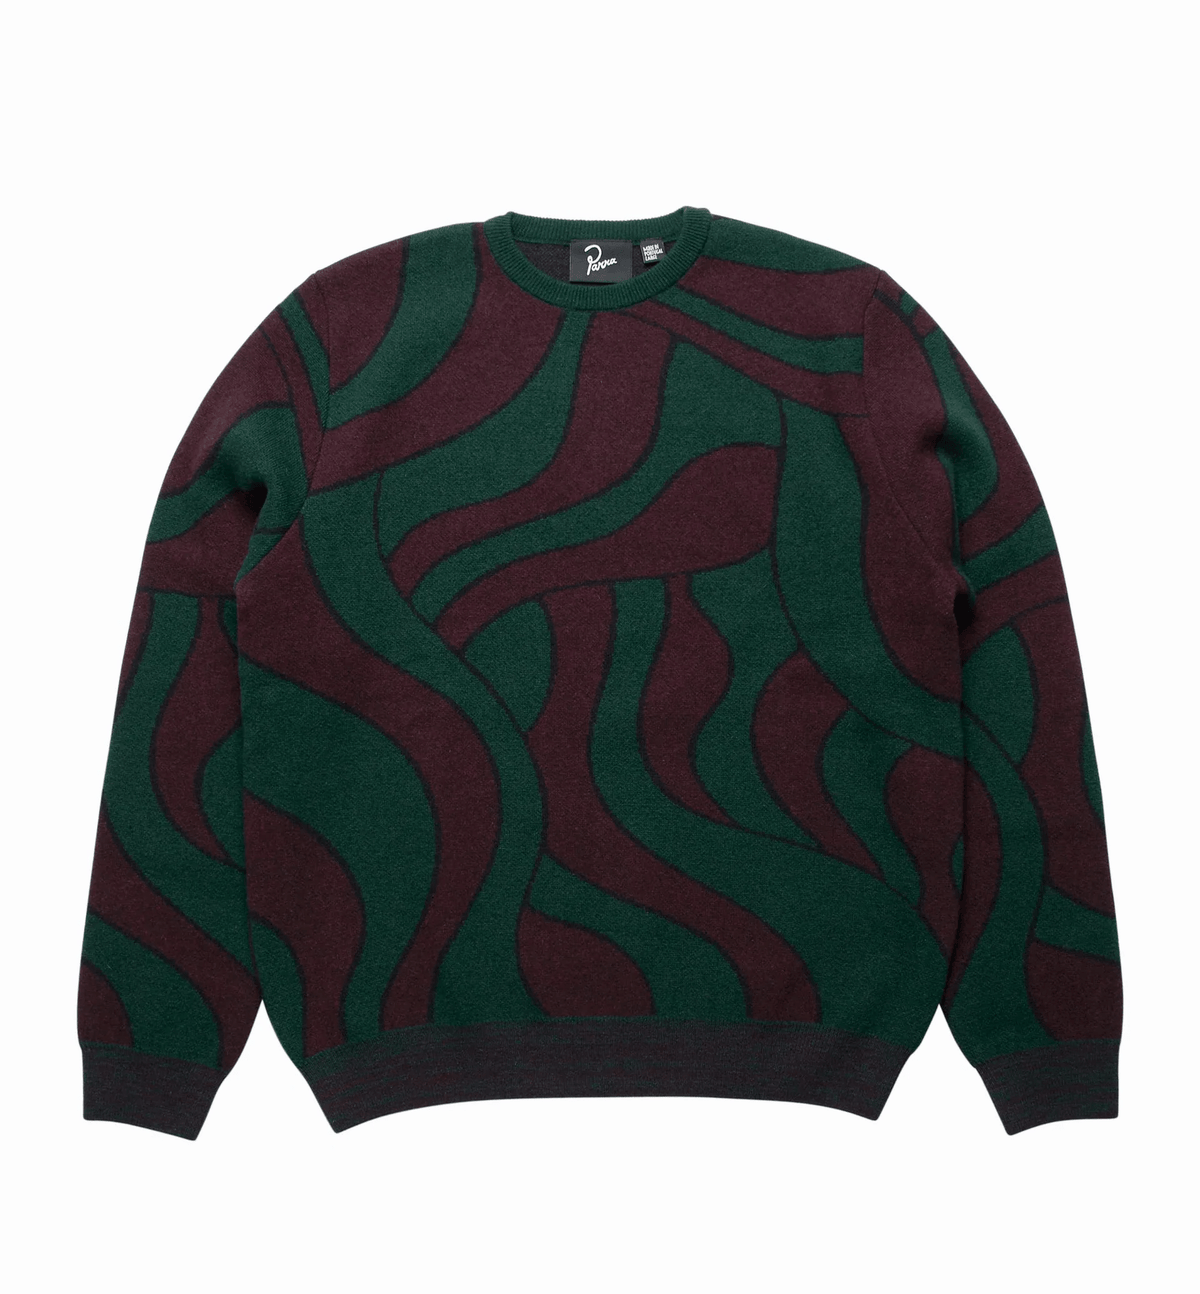 By Parra Distorted Waves Knitted Pullover